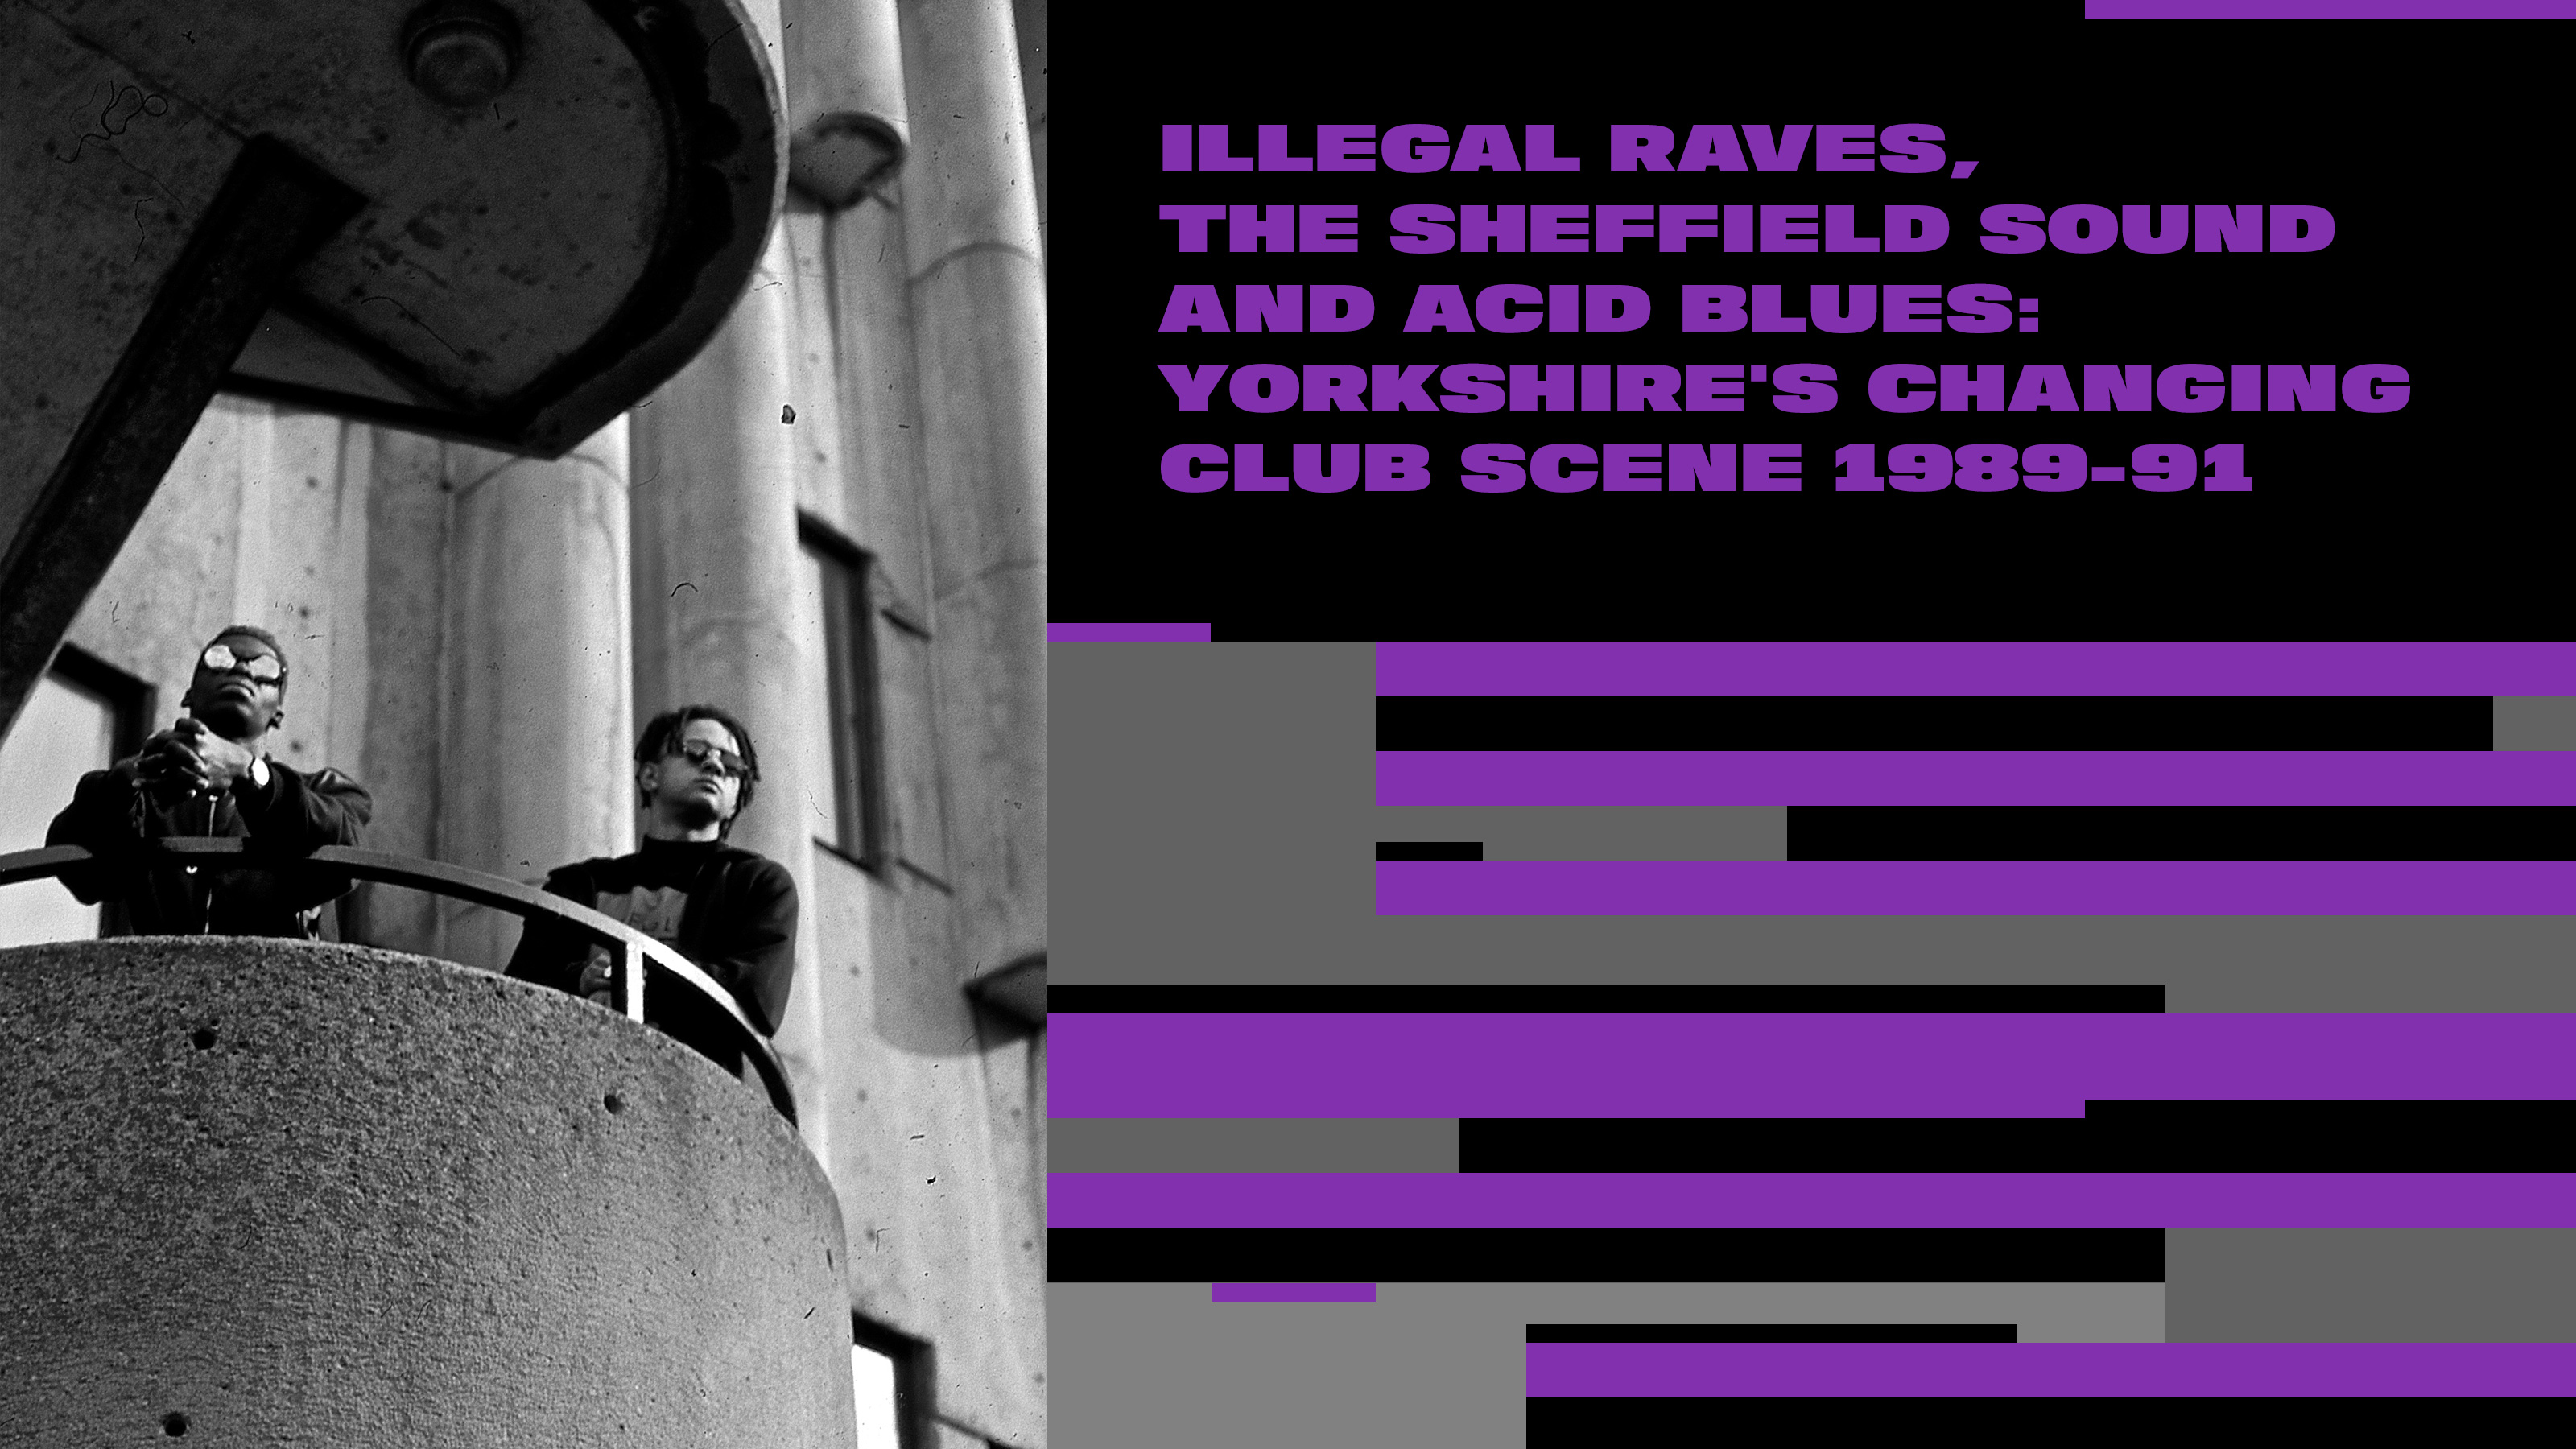 Illegal Raves, The Sheffield Sound And Acid Blues: Yorkshire's Changing Club Scene 1989-91